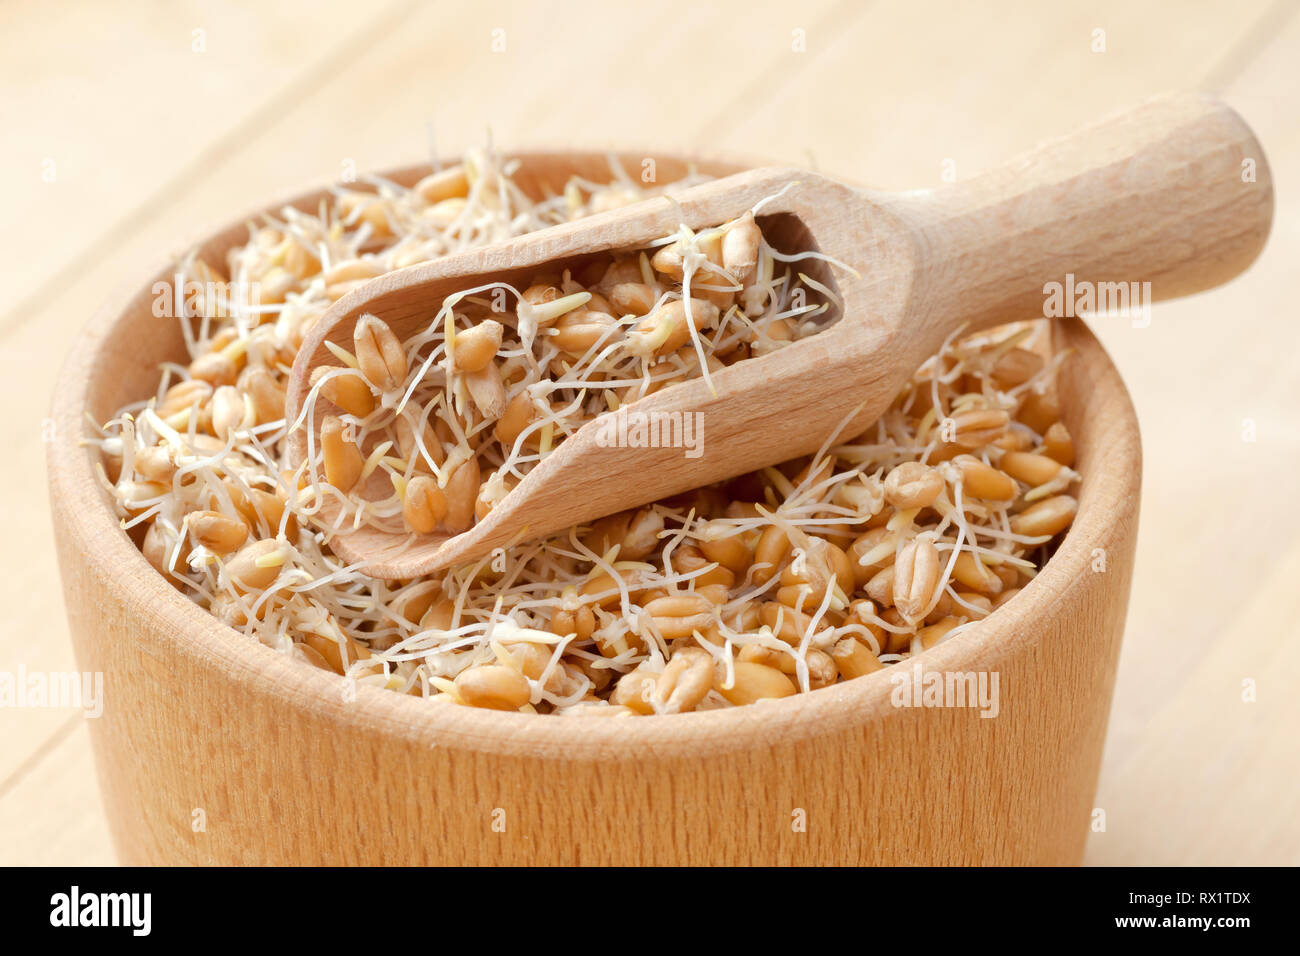 Wooden bowl and scoop filled of sprouted wheat seeds and sack of grains, nutrition healthy food. Stock Photo